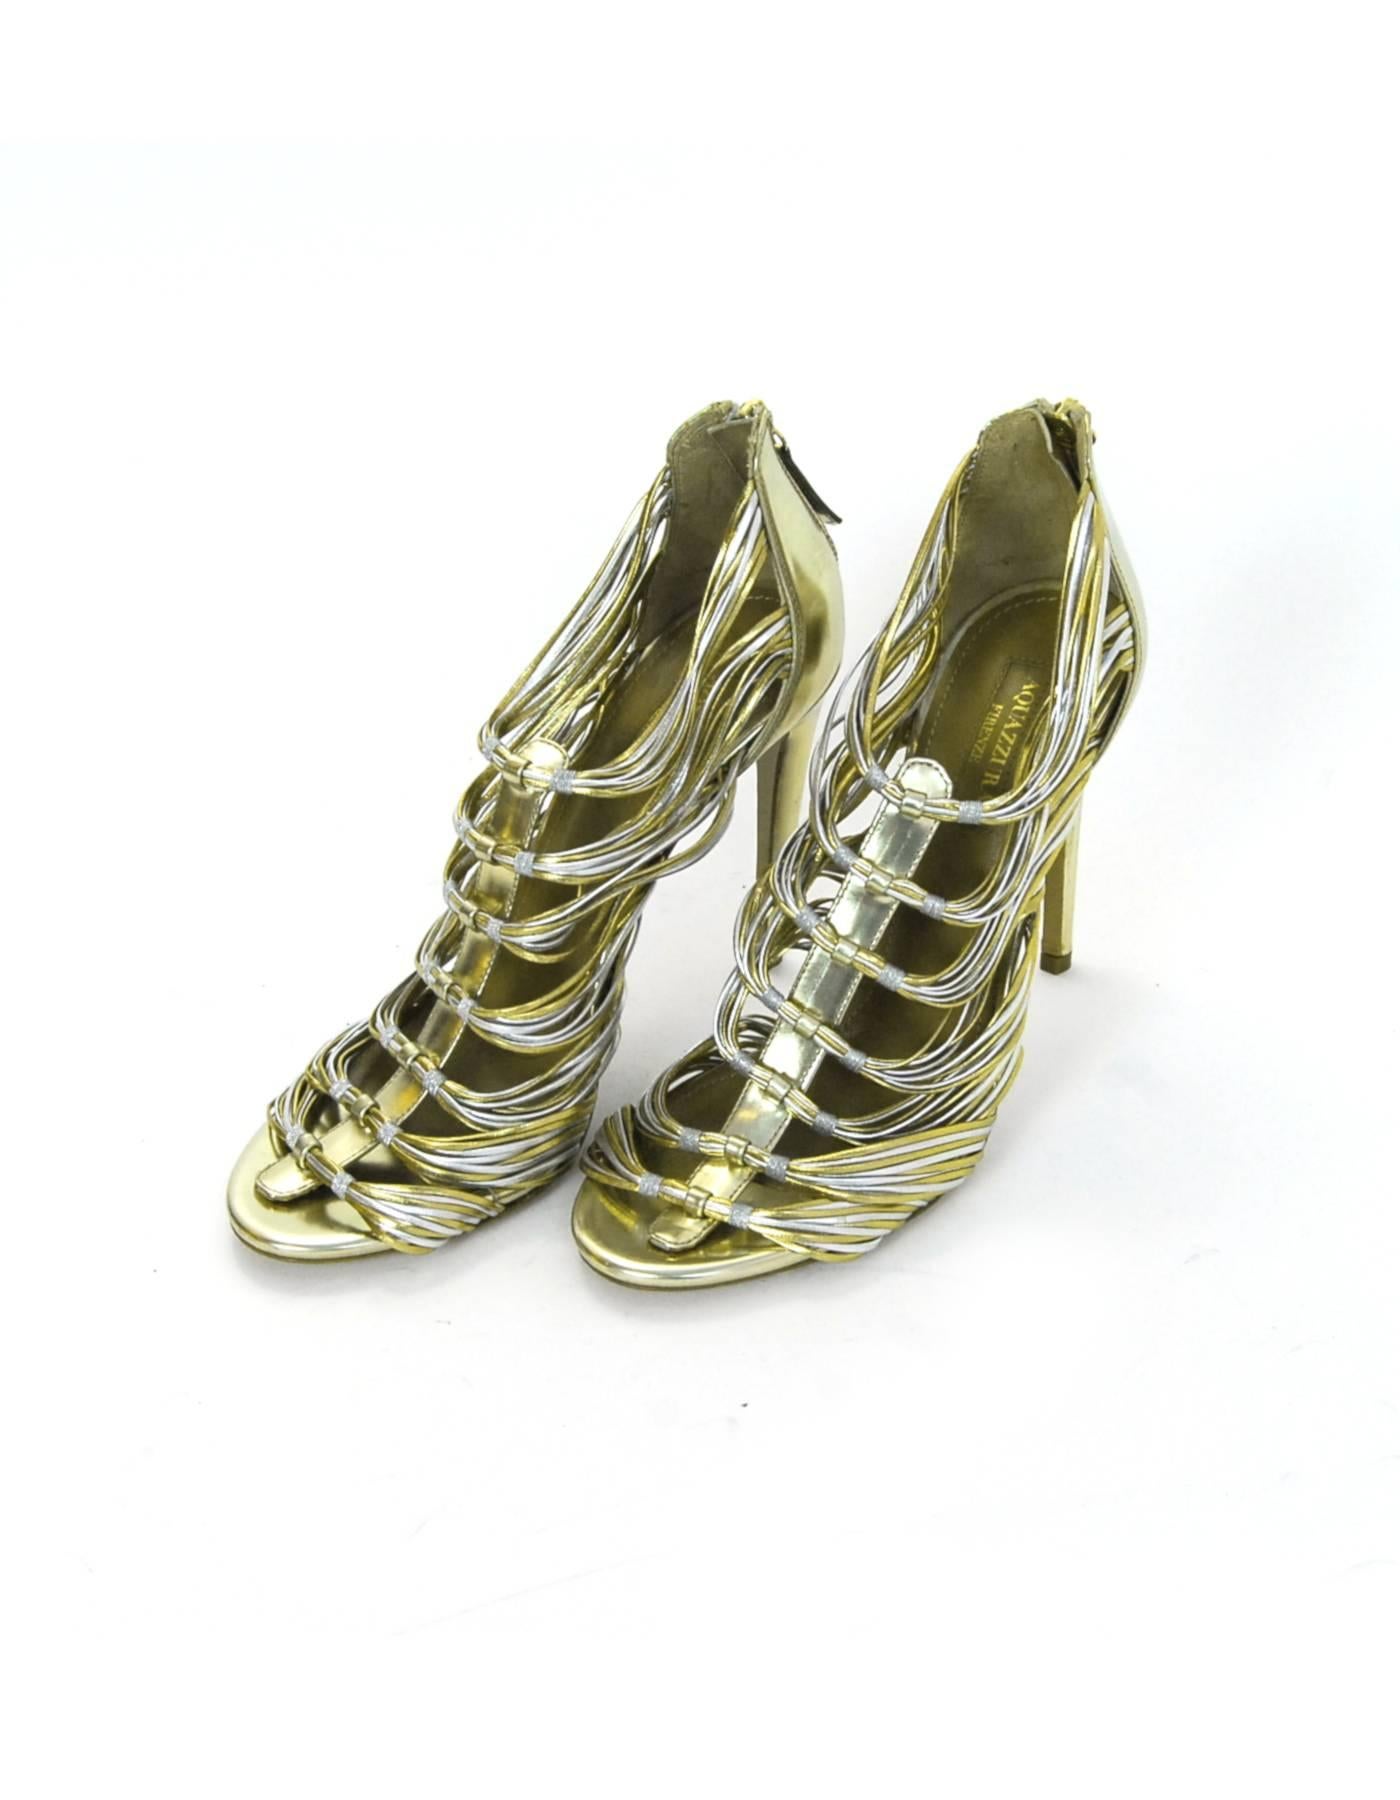 Aquazzura Gold & Silver Xena 105 Sandals Sz 37 NEW

Made In: Italy
Color: Gold, silver
Materials: Suede
Closure/Opening: Zip closure at back of heel
Sole Stamp: Aquazzura Firenze Vero Cuoio Made In Italy 37
Retail Price: $950 + tax
Overall